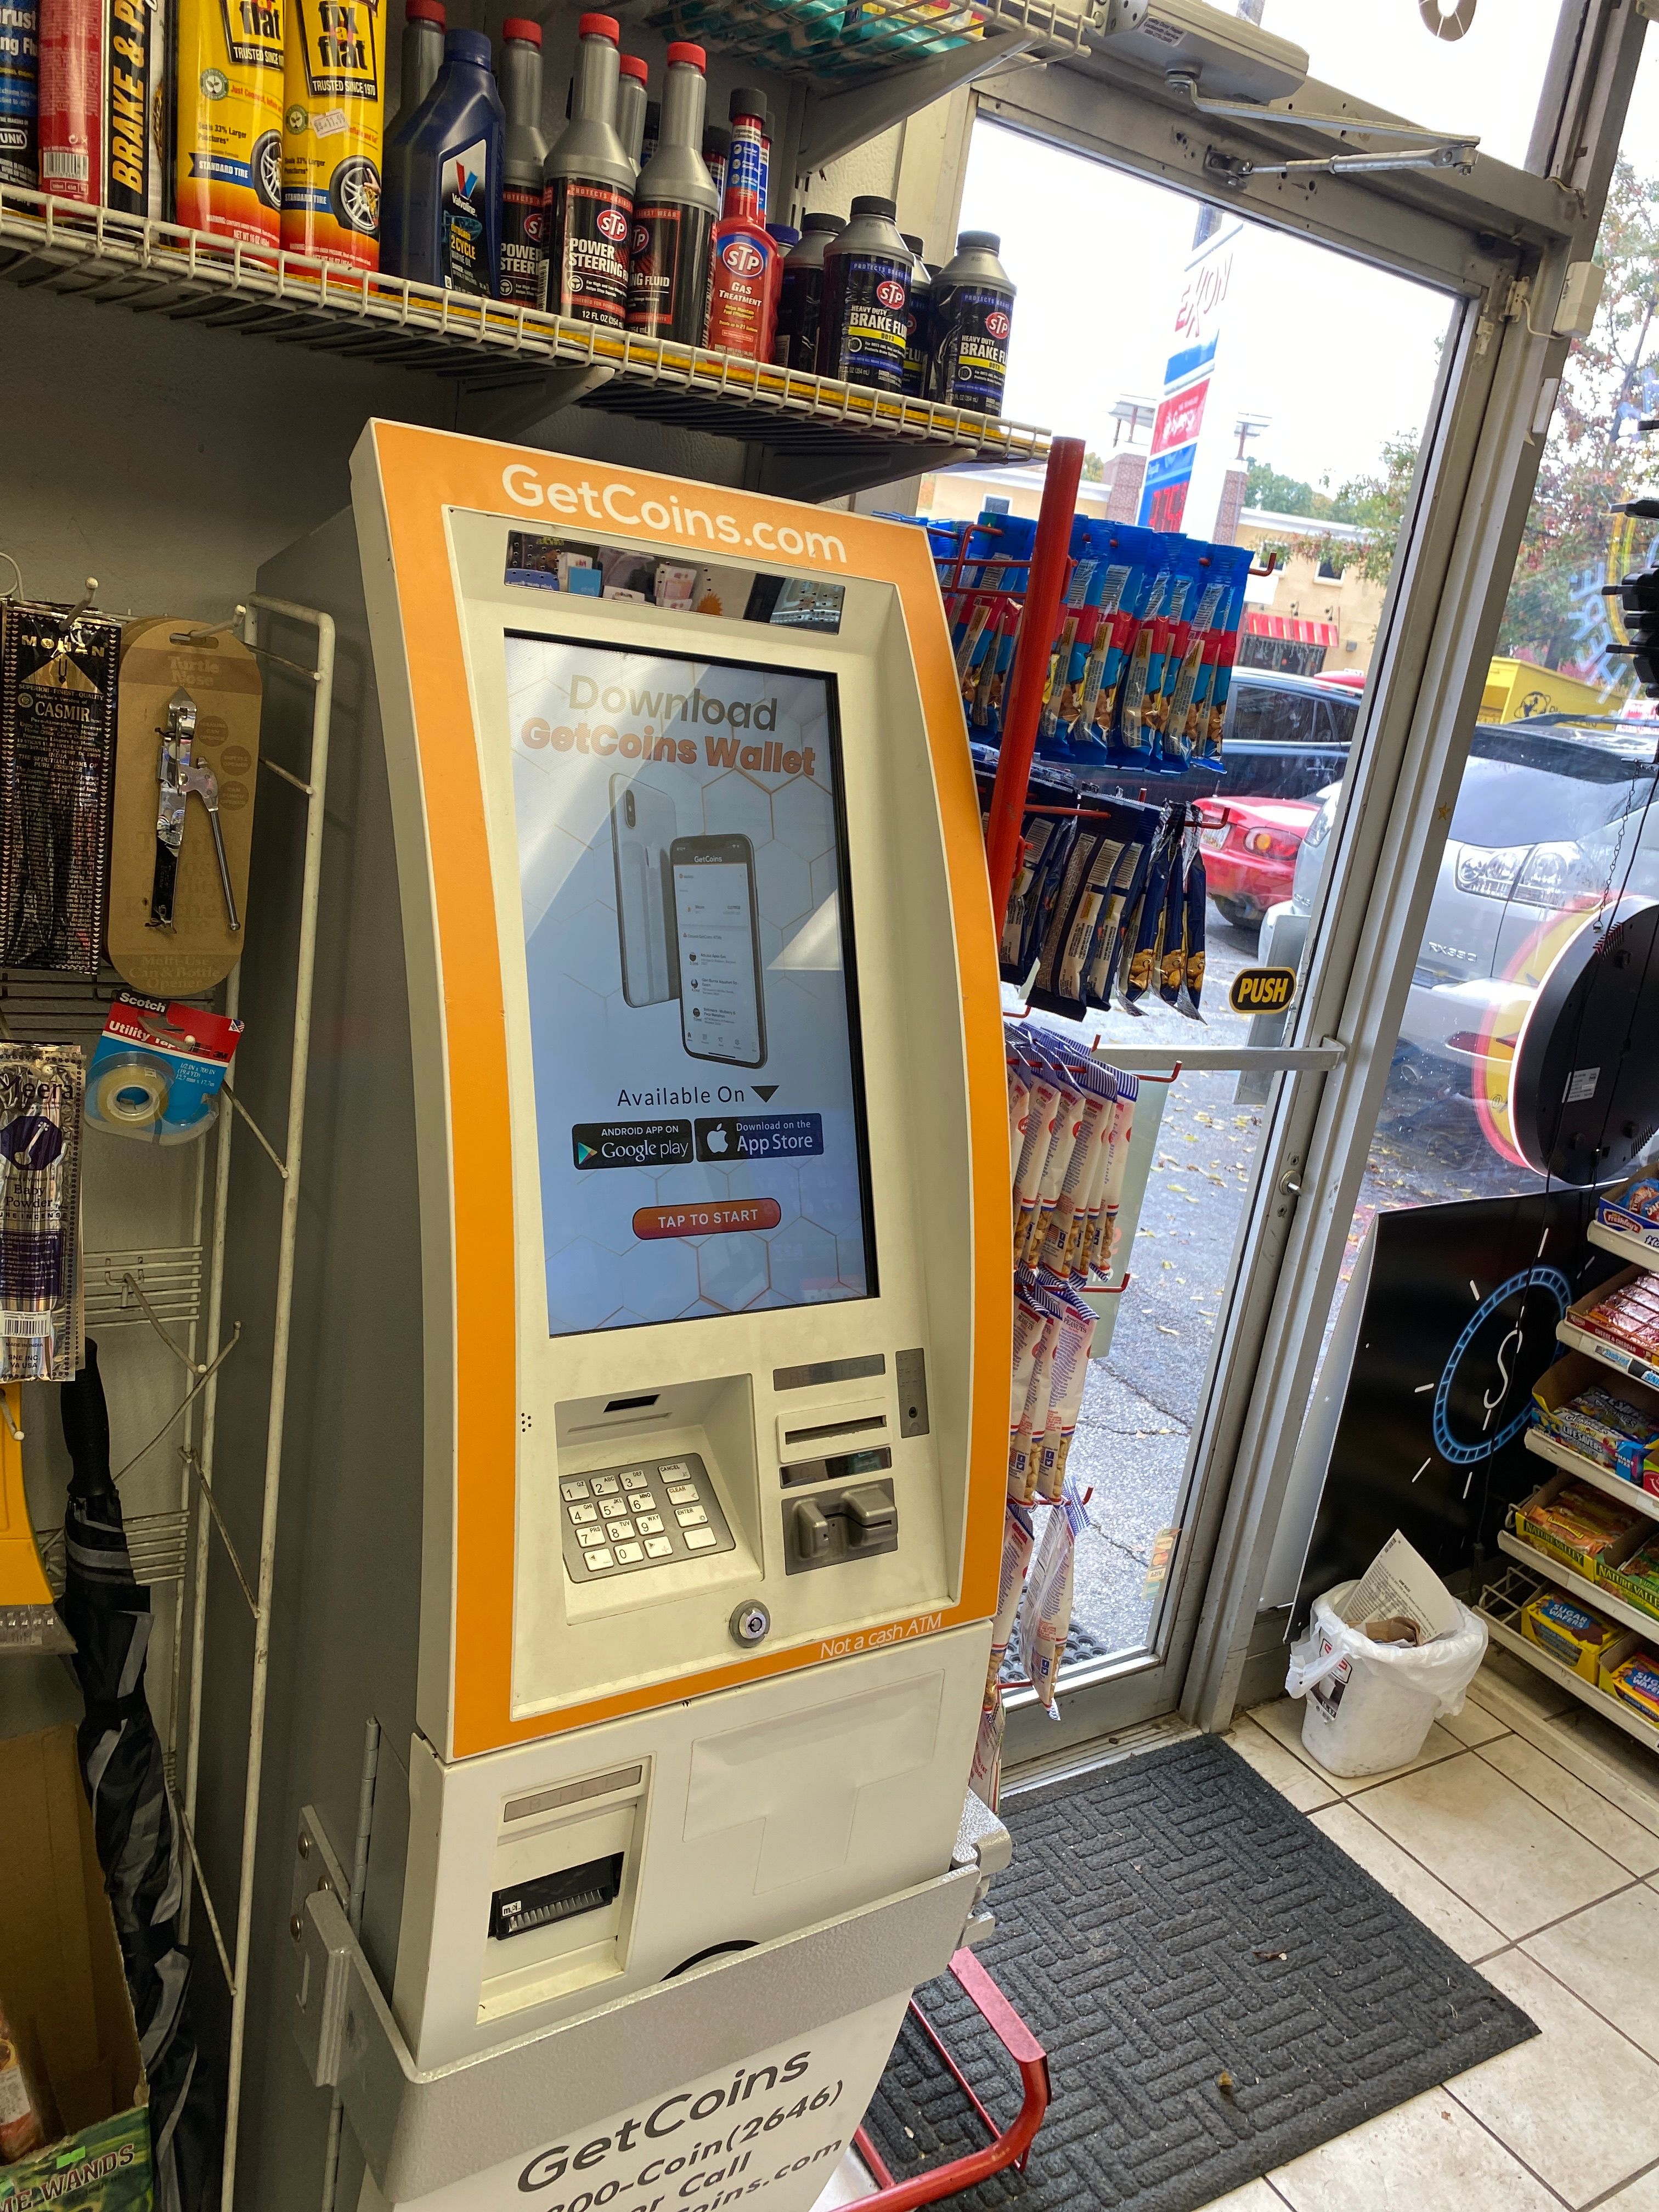 Getcoins - Bitcoin ATM - Inside of Exxon in College Park, Maryland